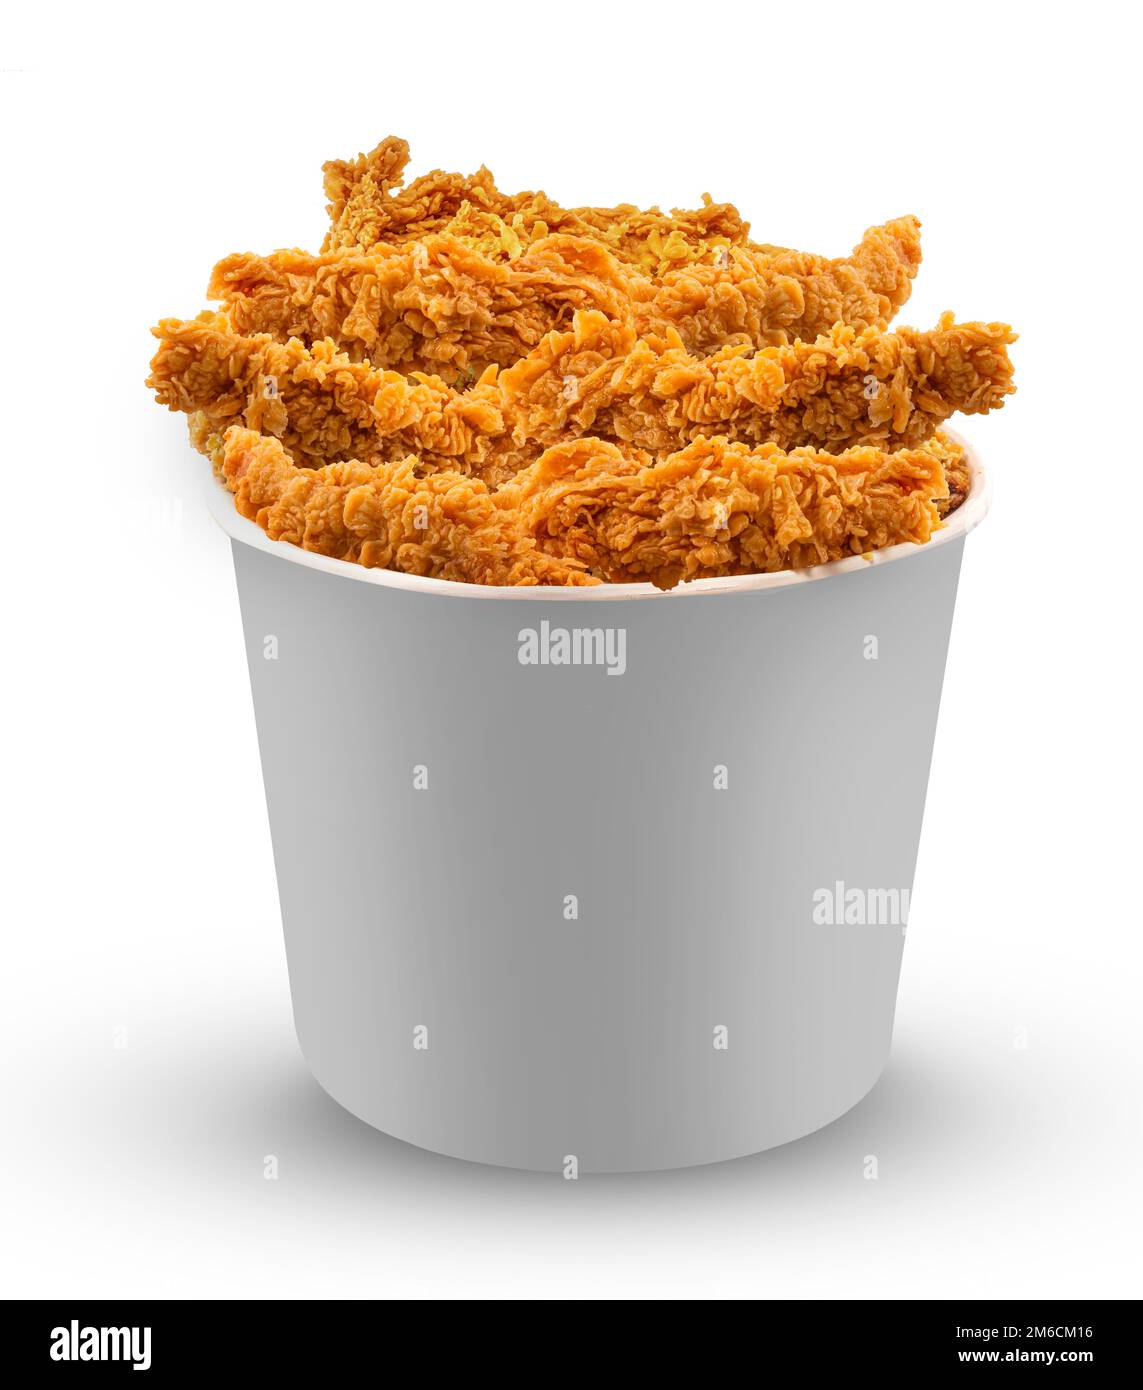 Fried chicken bucket photography - images stock and Alamy hi-res